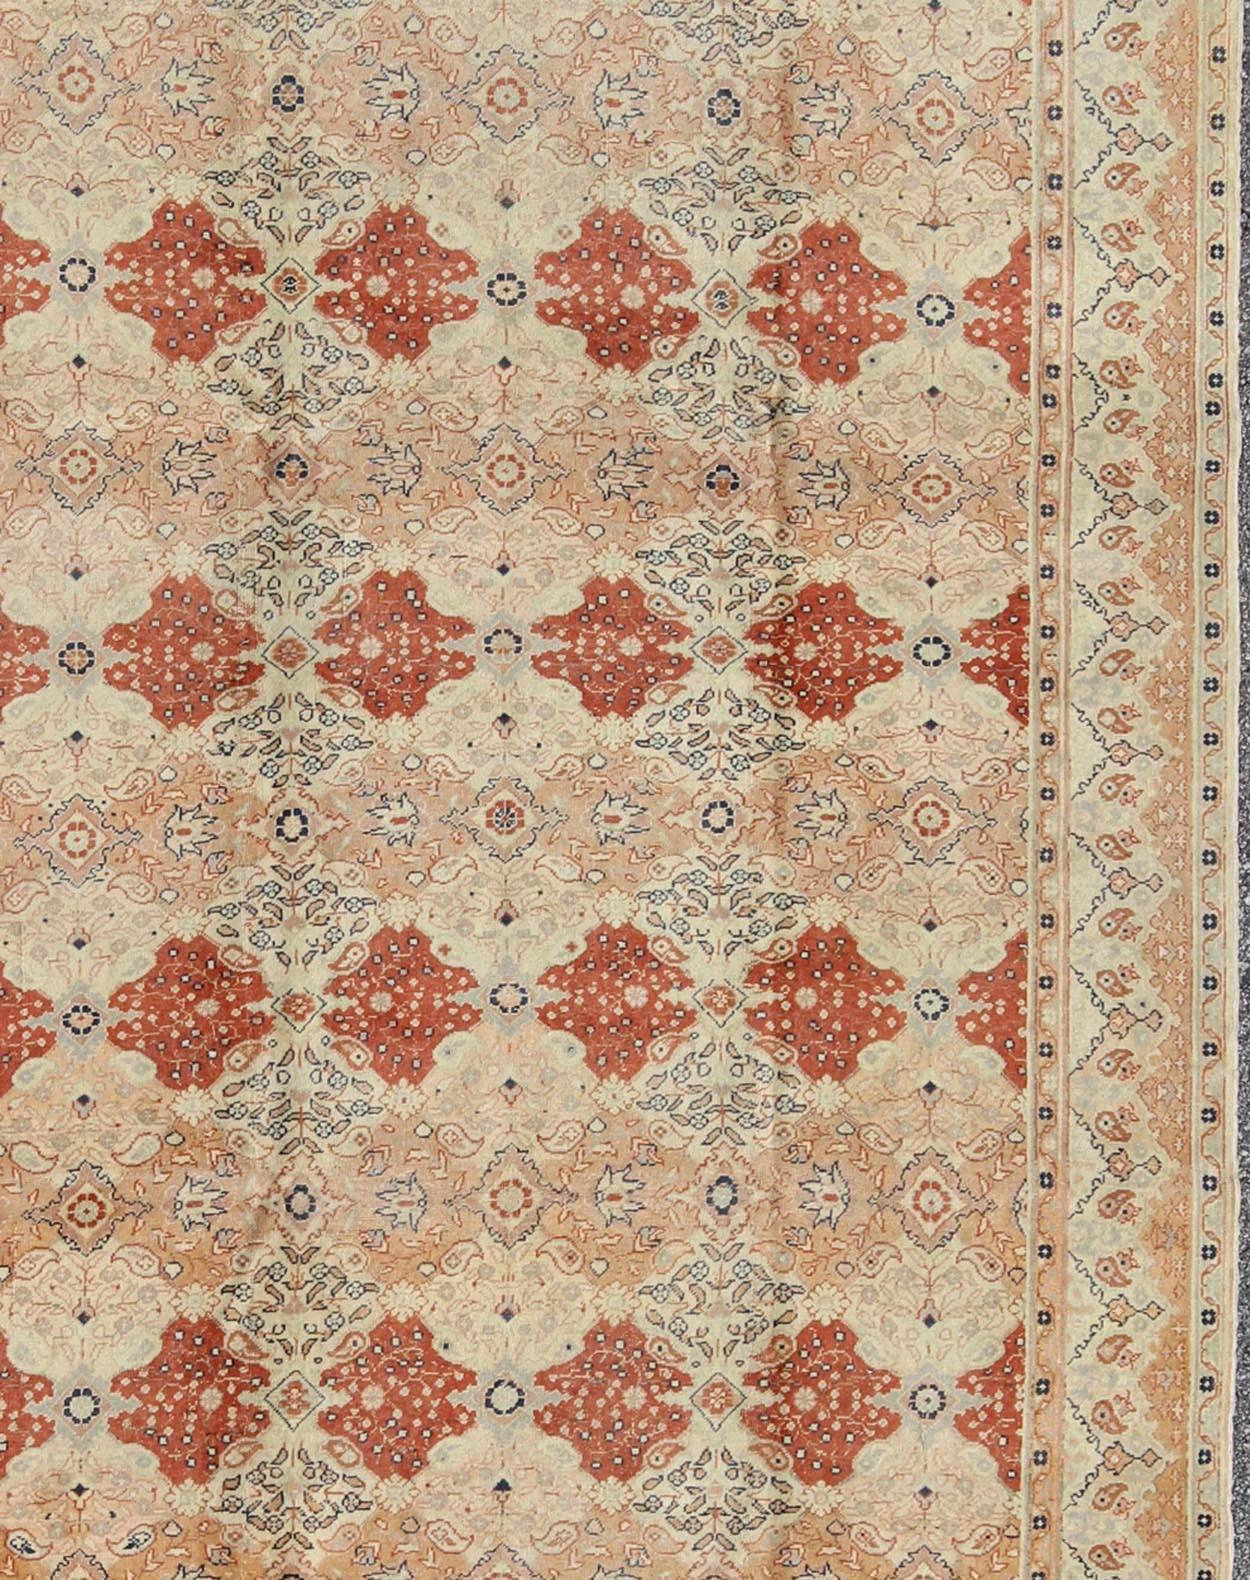 Oushak Fine Turkish Sivas Rug in Rust, Salmon, Cream and Navy Blue Outlines